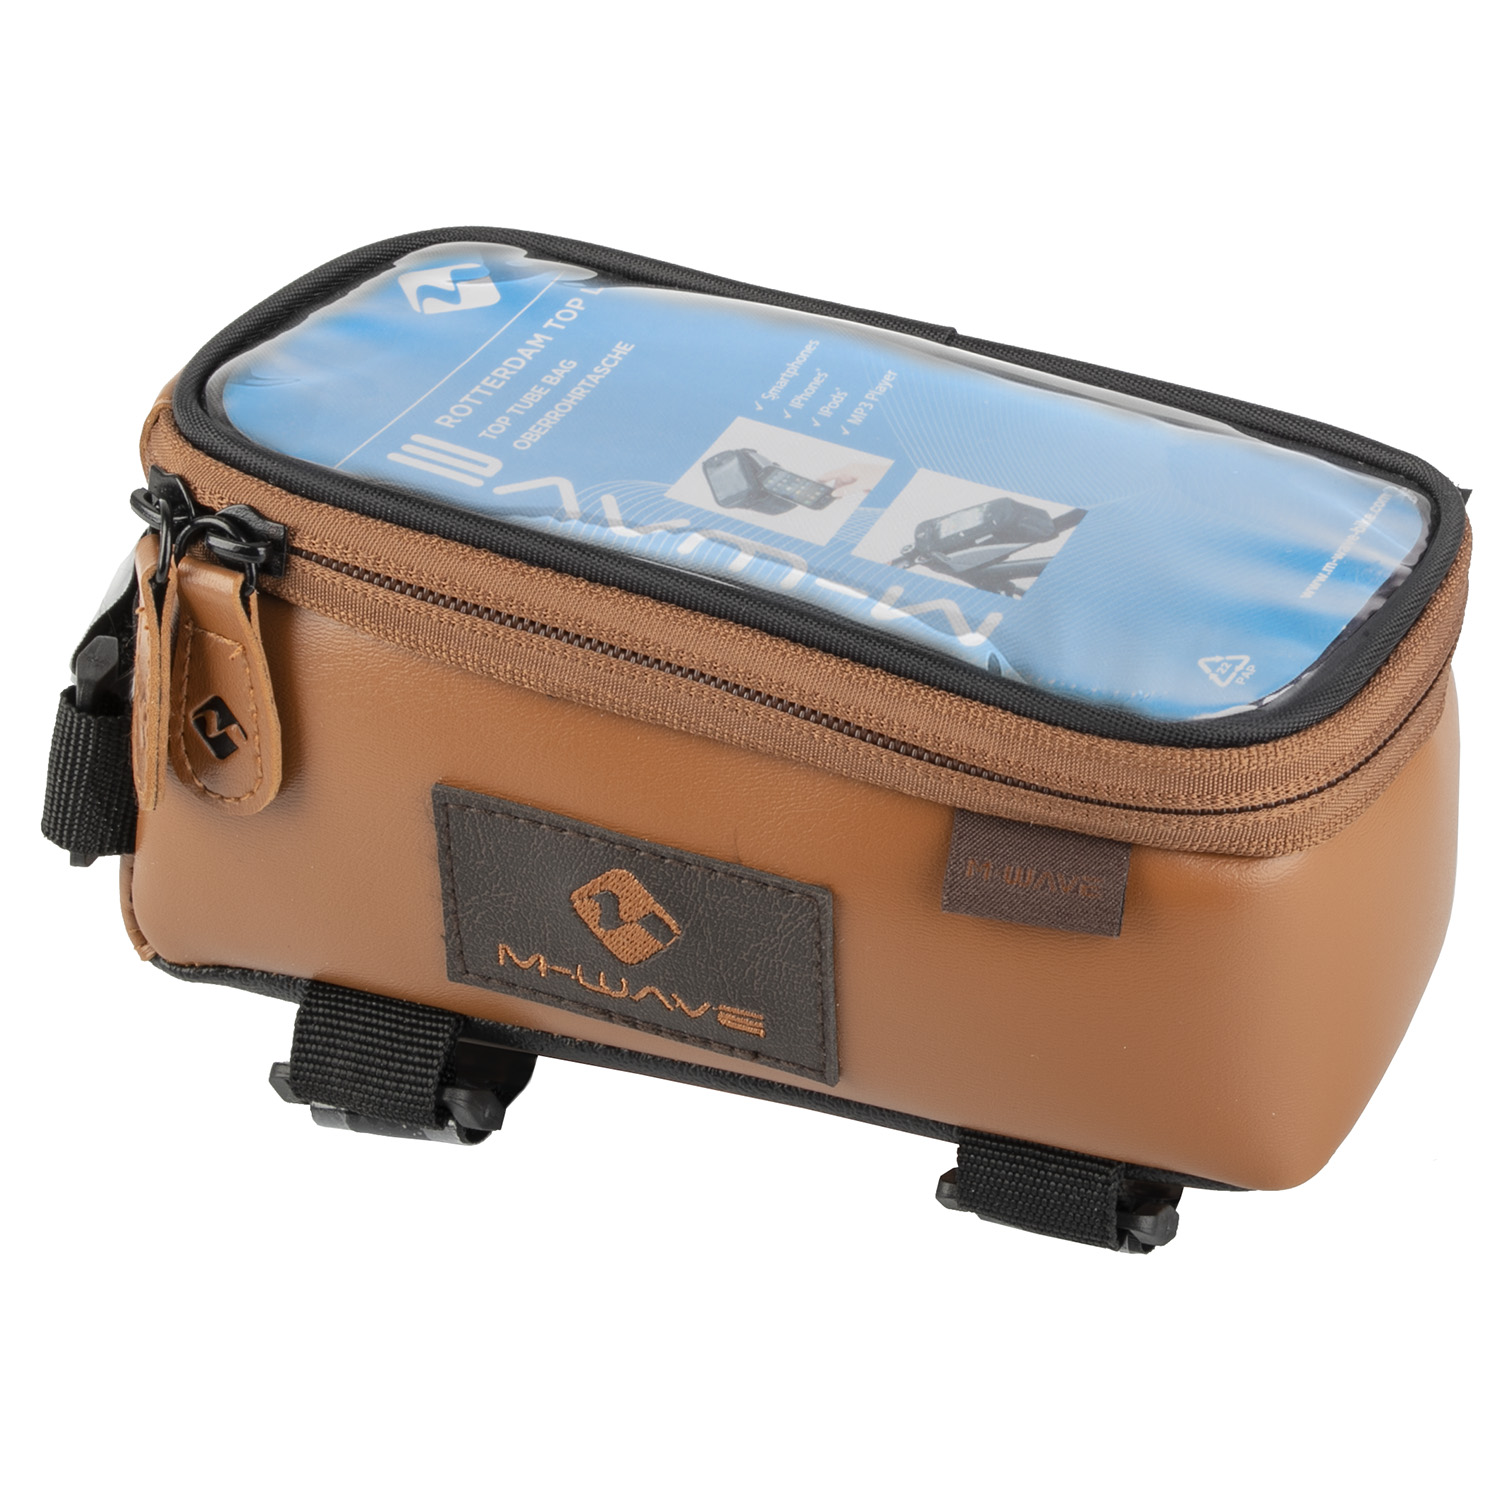 M-WAVE Rotterdam Top XL LE smartphone top tube bag – AVAILABLE IN SELECTED BIKE SHOPS